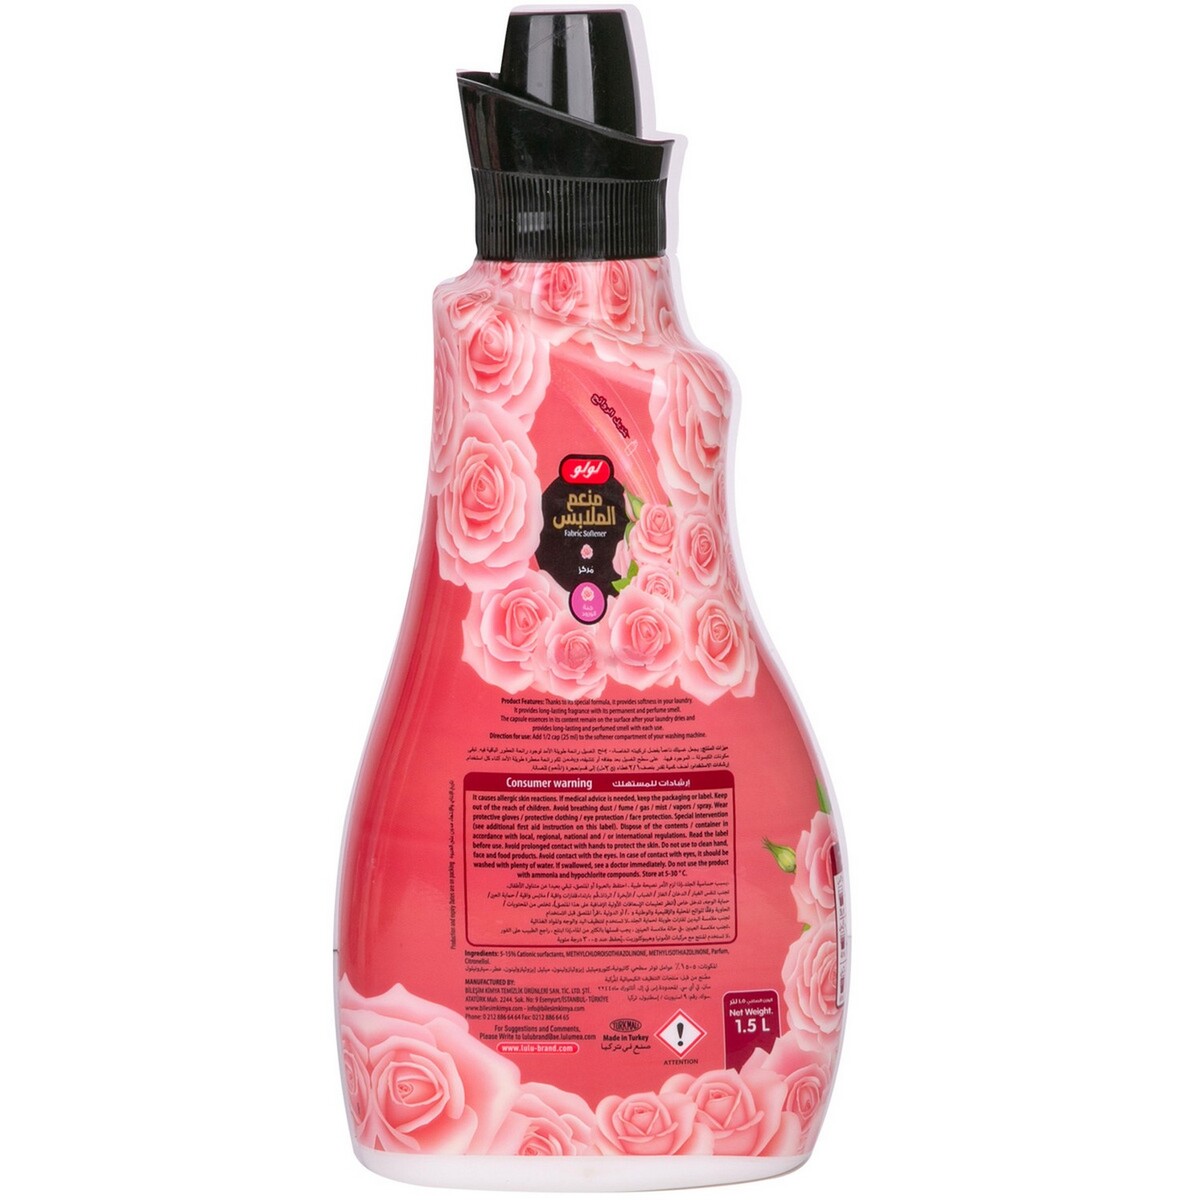 Lulu Fabric Softener Concentrated Rose 1.5Litre